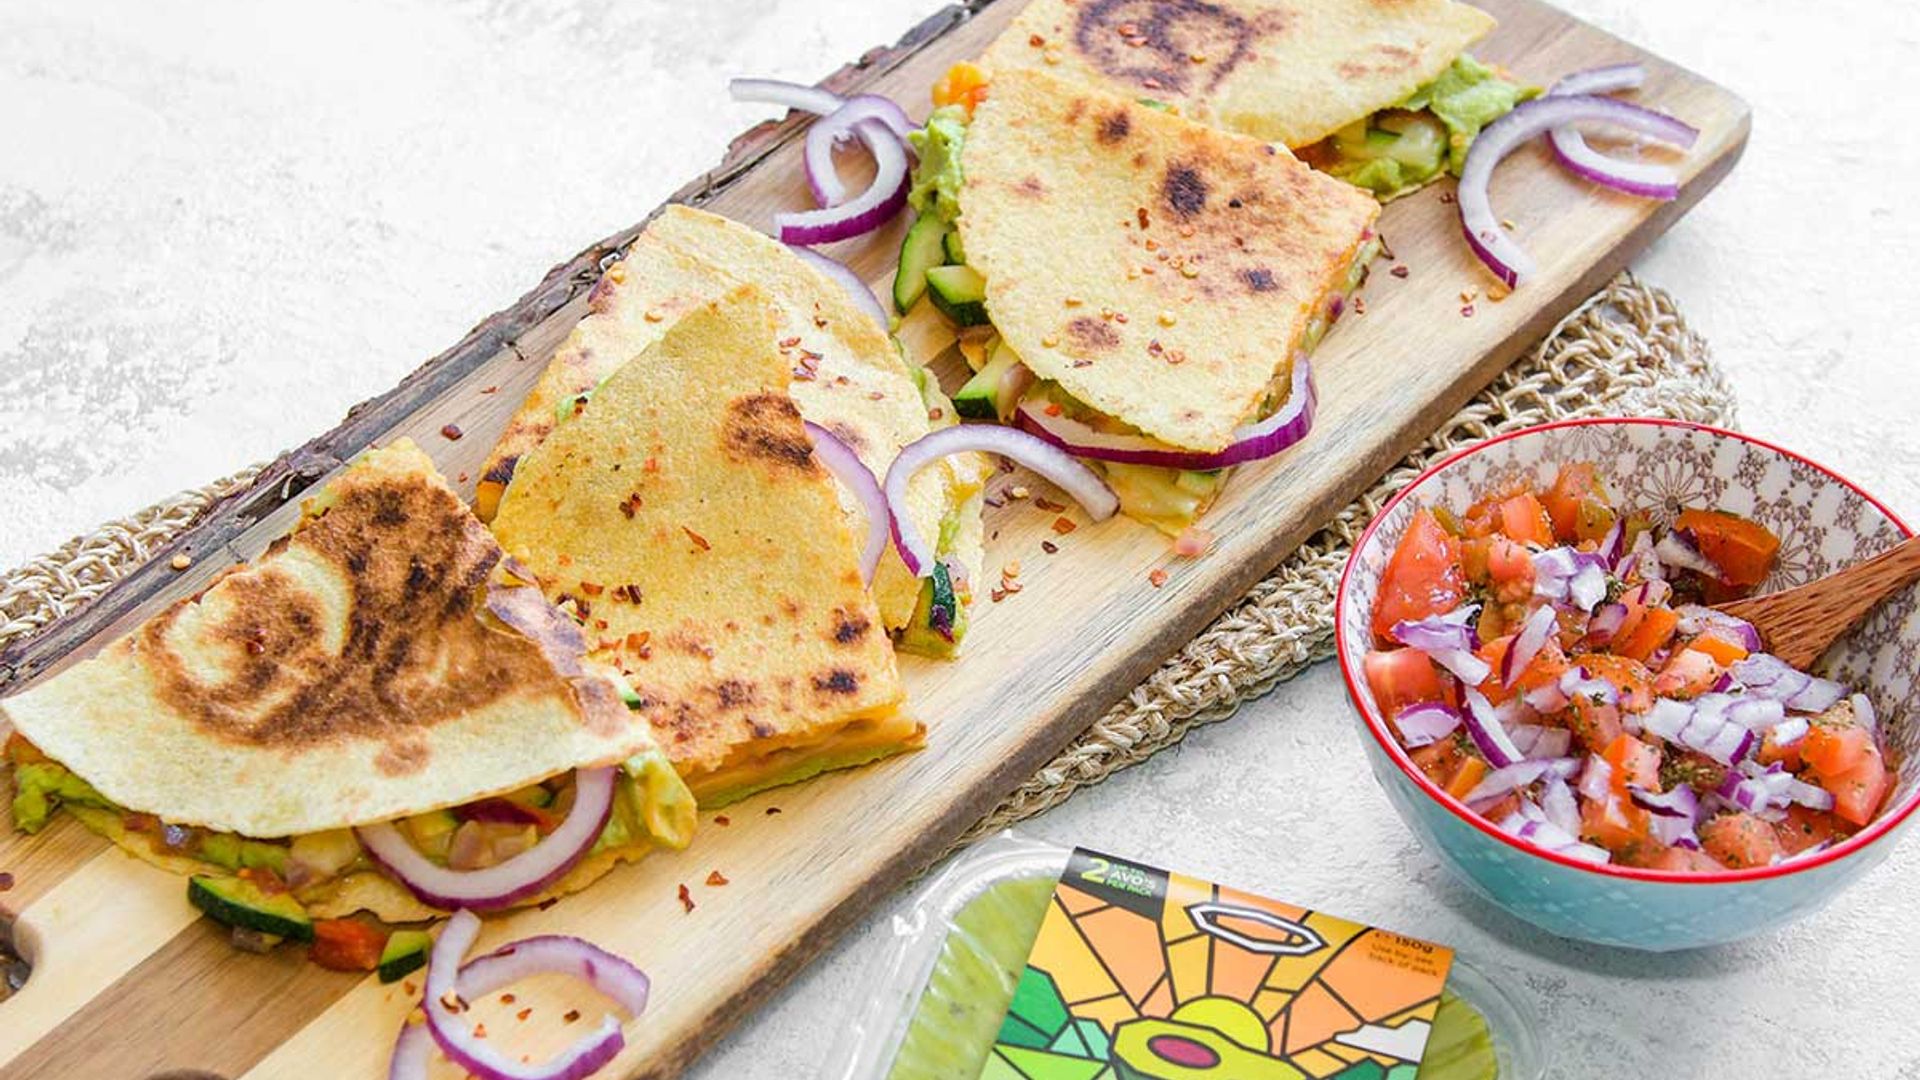 Who fancies Mexican food tonight? We have the perfect quesadilla recipe & it's super quick 